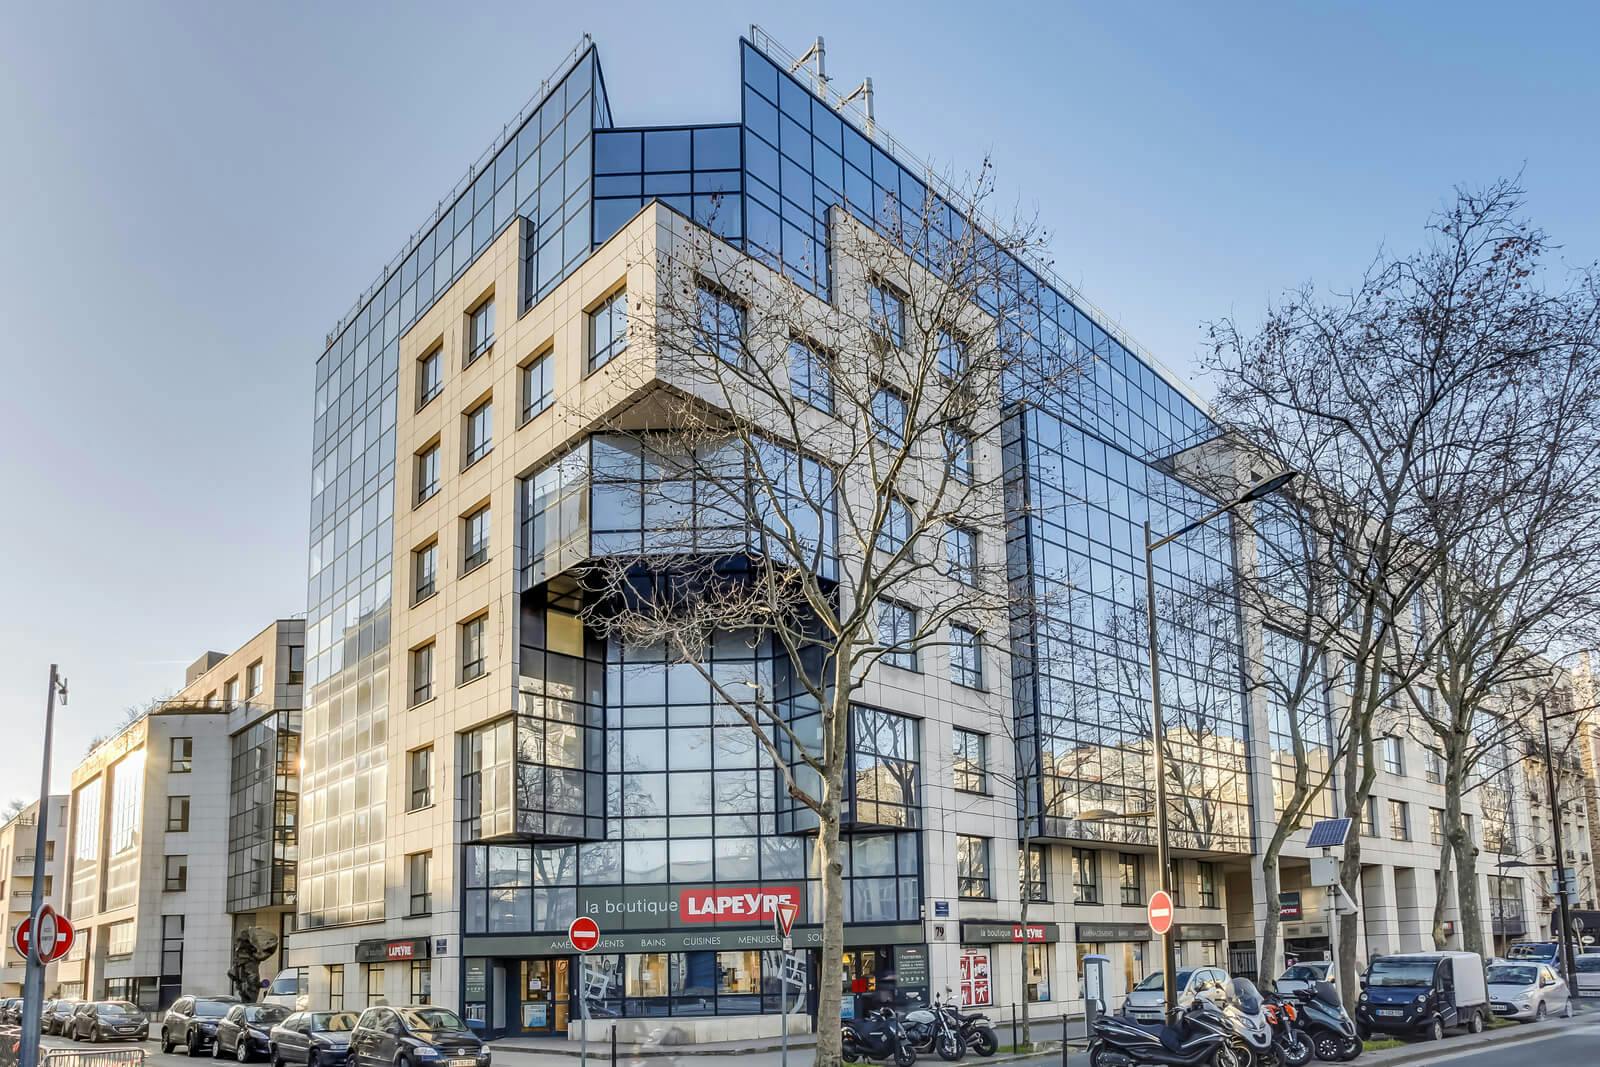 Deskeo leases two new spaces in Boulogne-Billancourt (2,300 sqm)